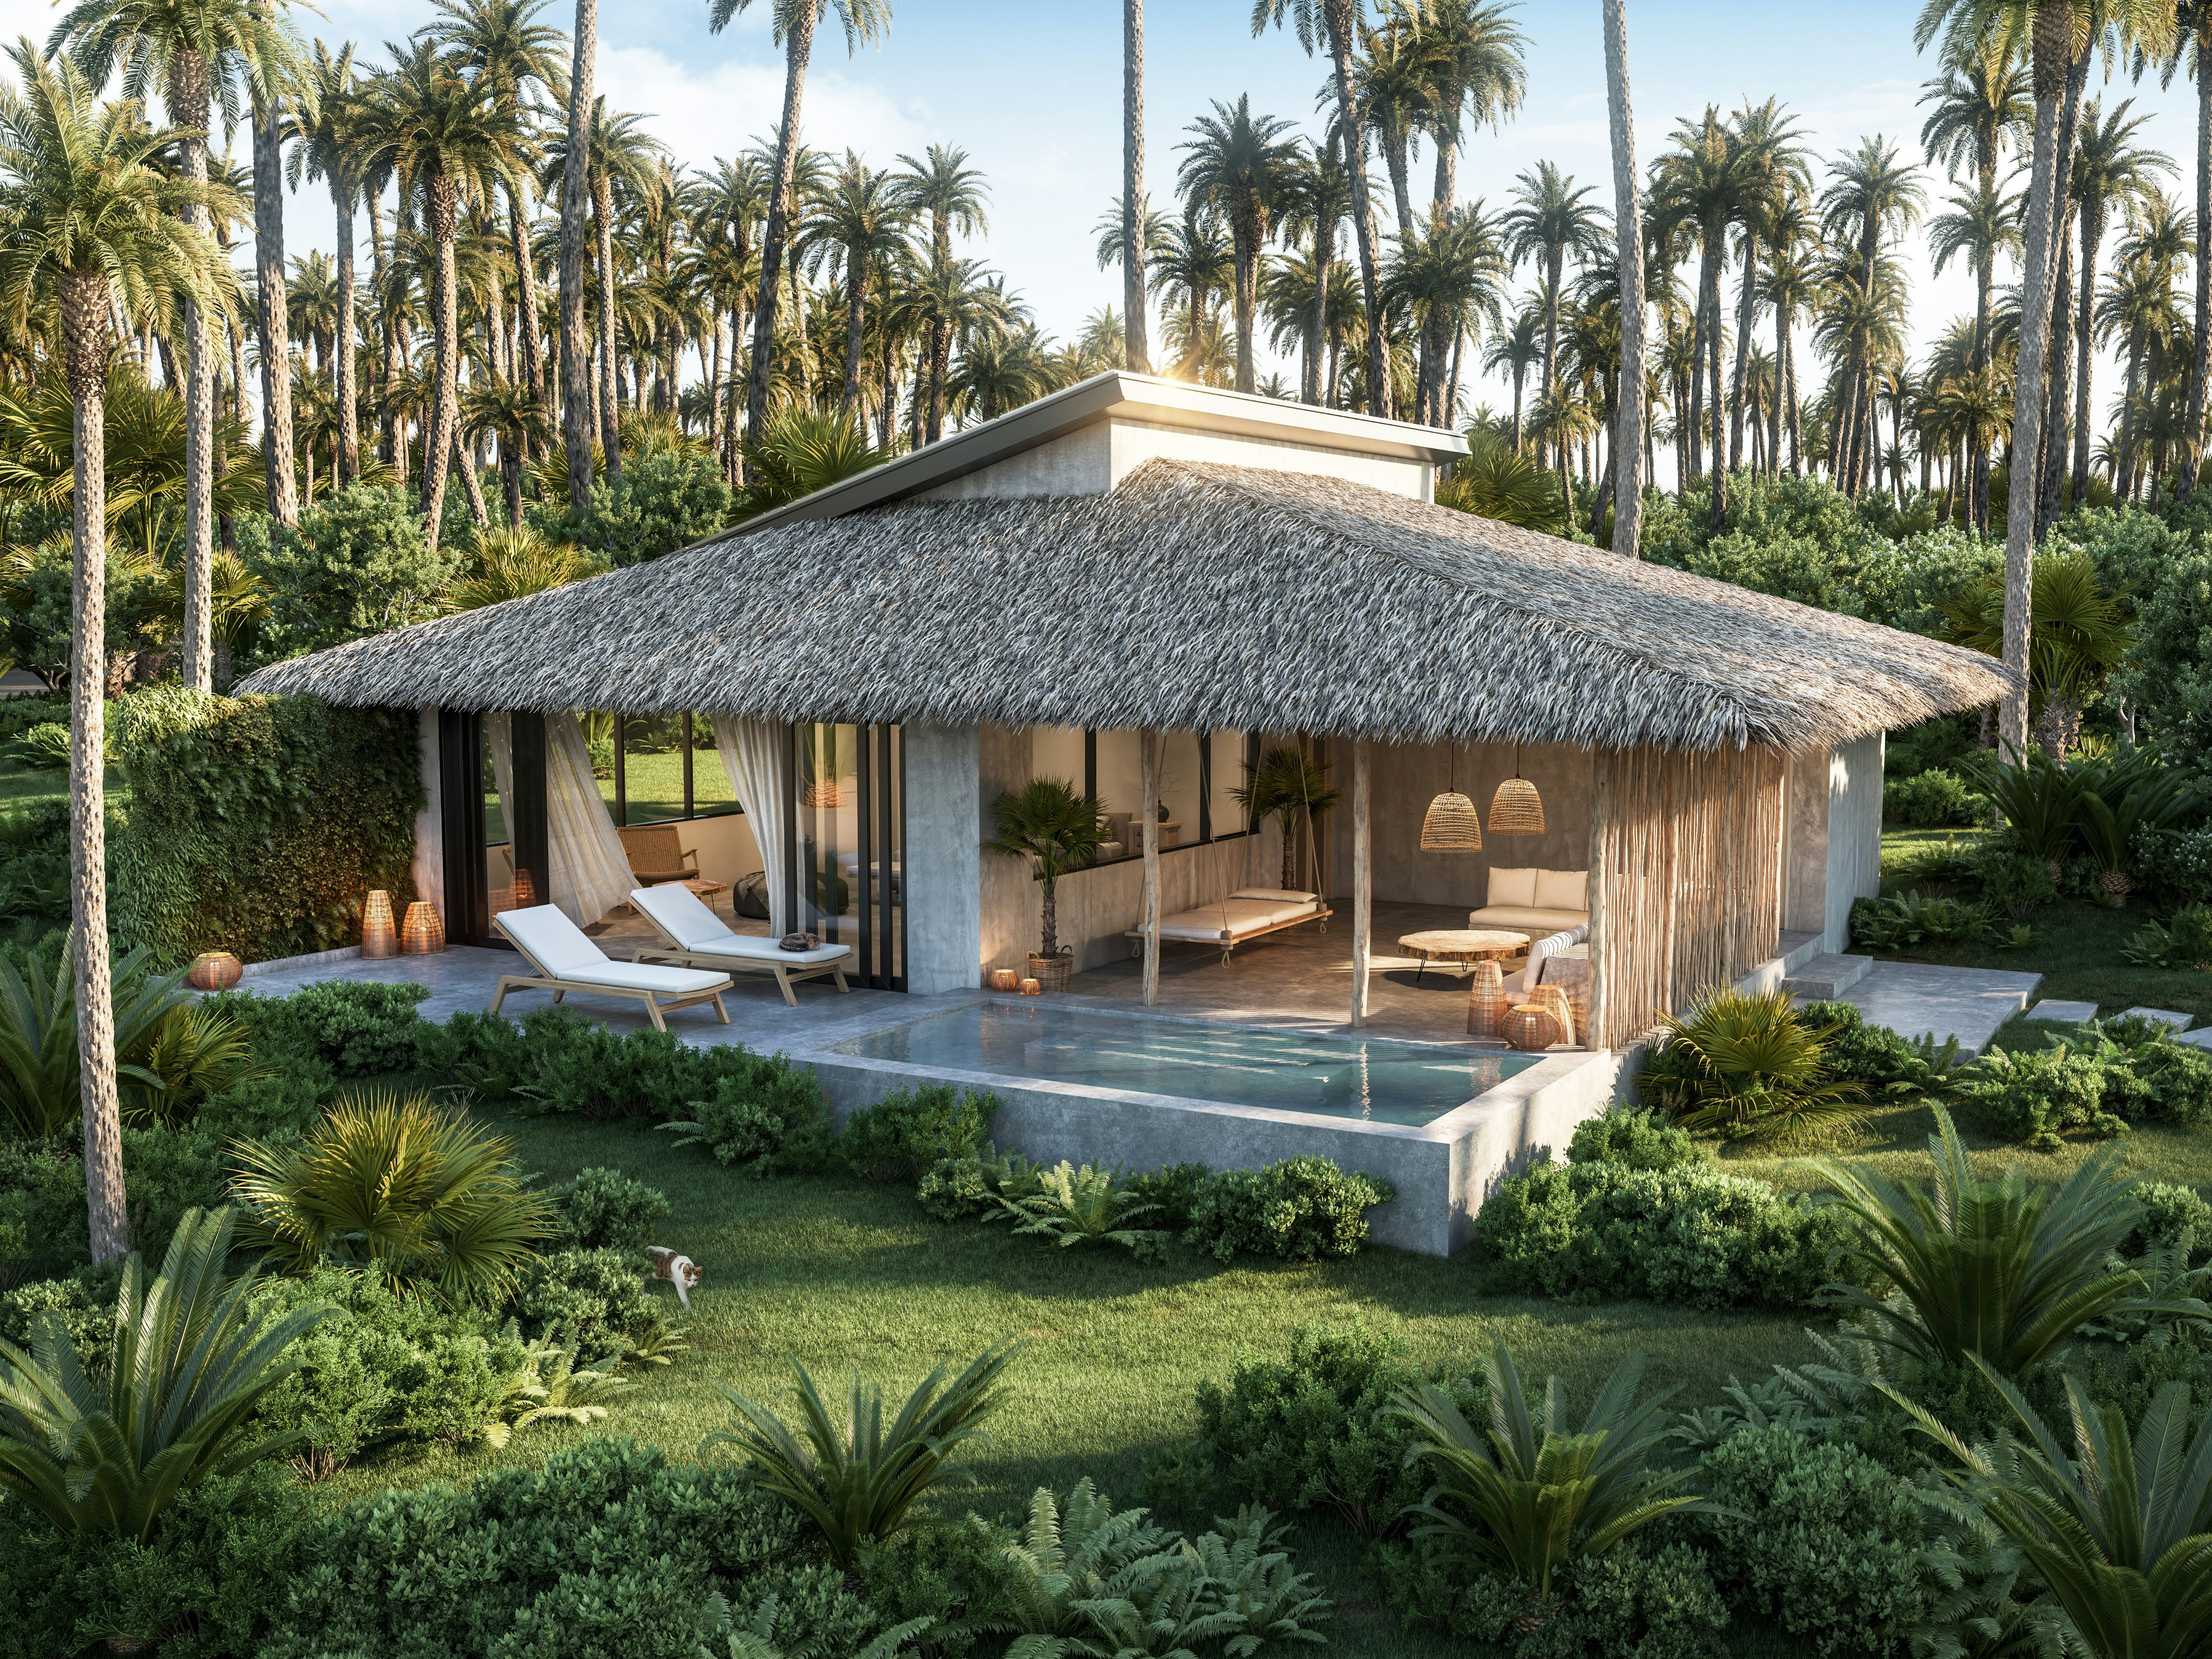 Artist rendering of a spacious hotel room with a thatched roof large open windows and a small pool towards the front of the room. The room is surrounded by palm trees and a manicured lawn dotted with small plants.